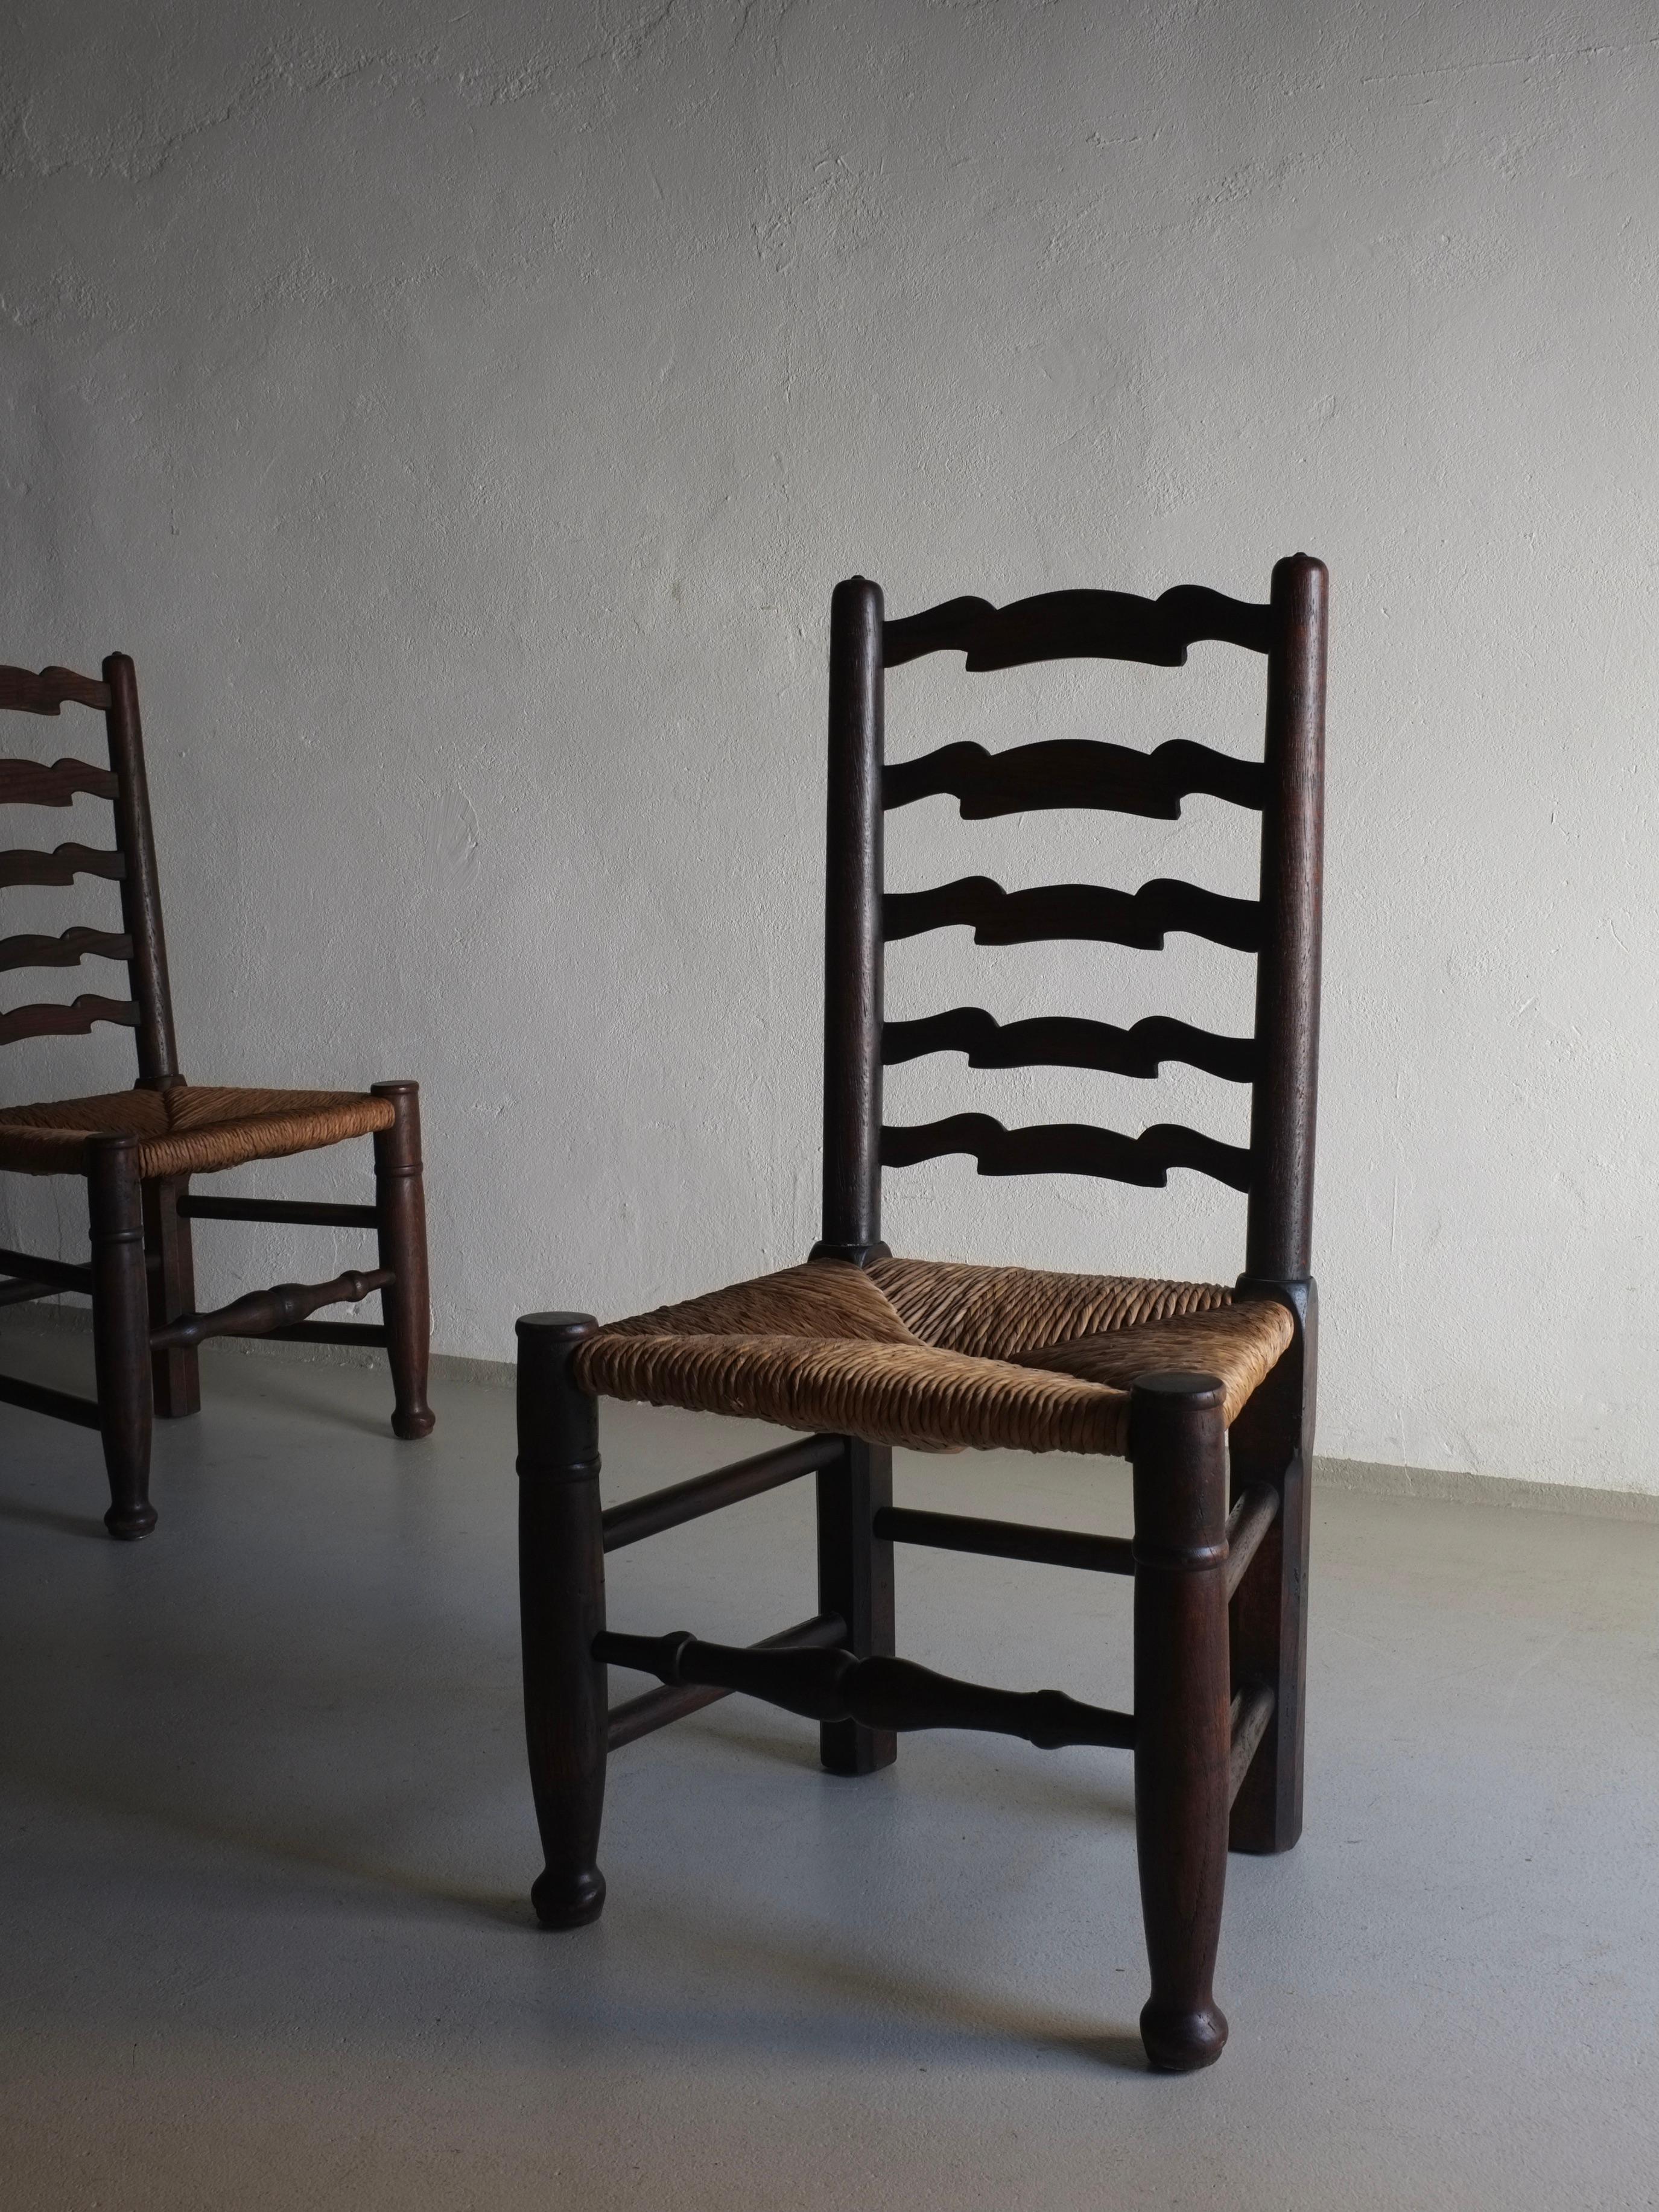 4 Brutalist Ladder Back Straw Seat Chairs, England, 1900s For Sale 8